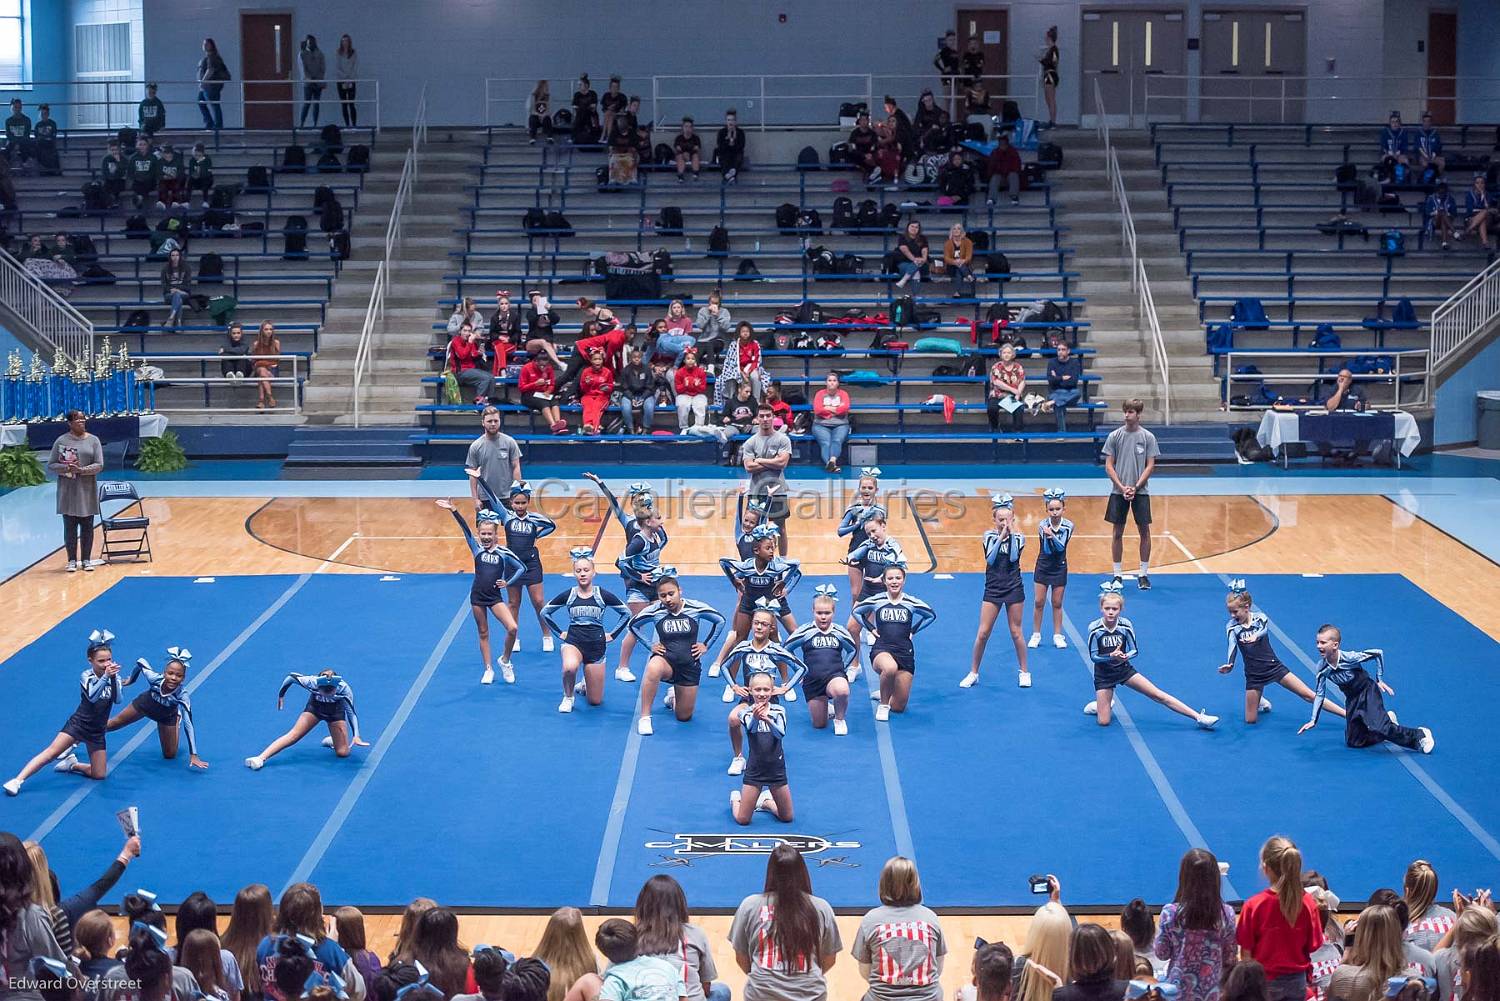 D6YouthCheerClassic 57.jpg